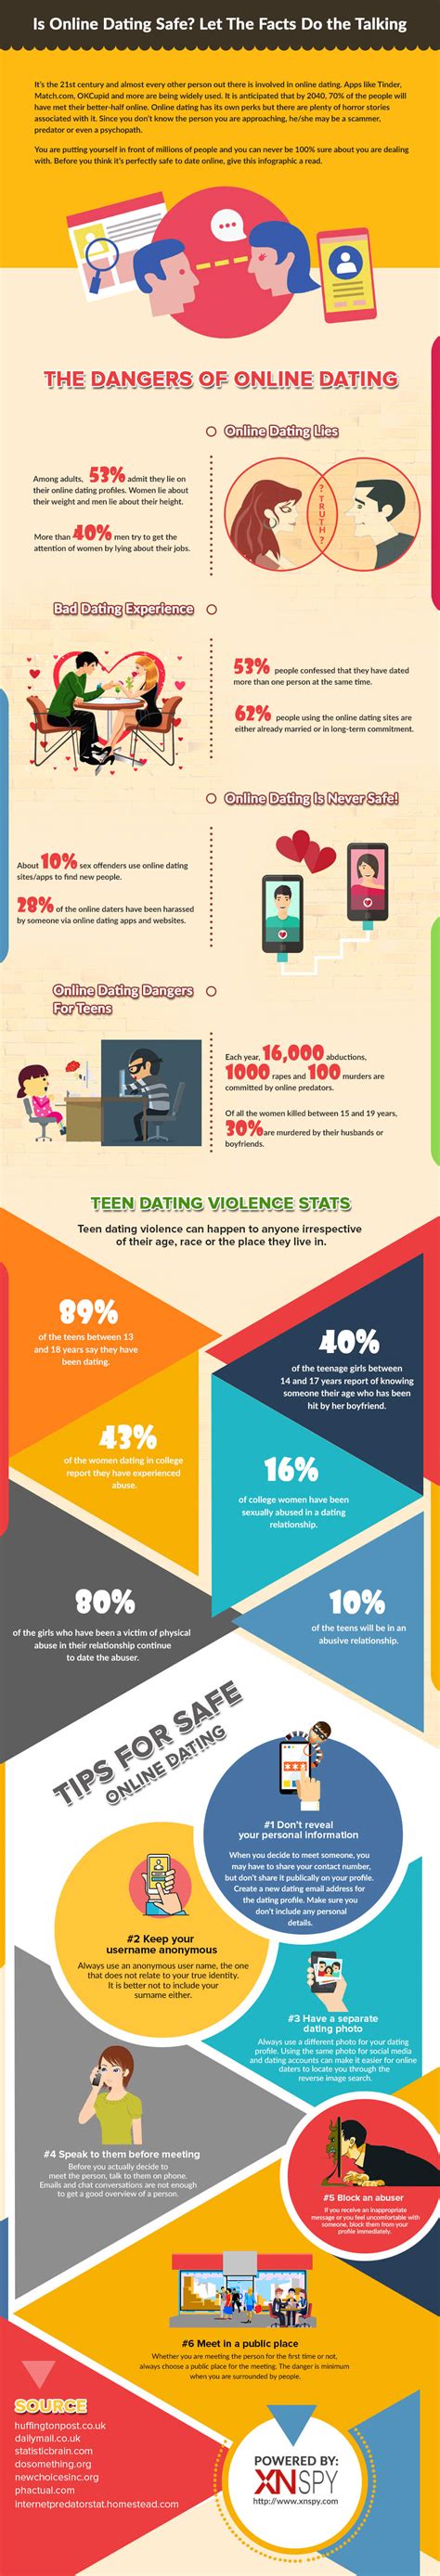 is online dating safe let the facts do the talking xnspy official blog